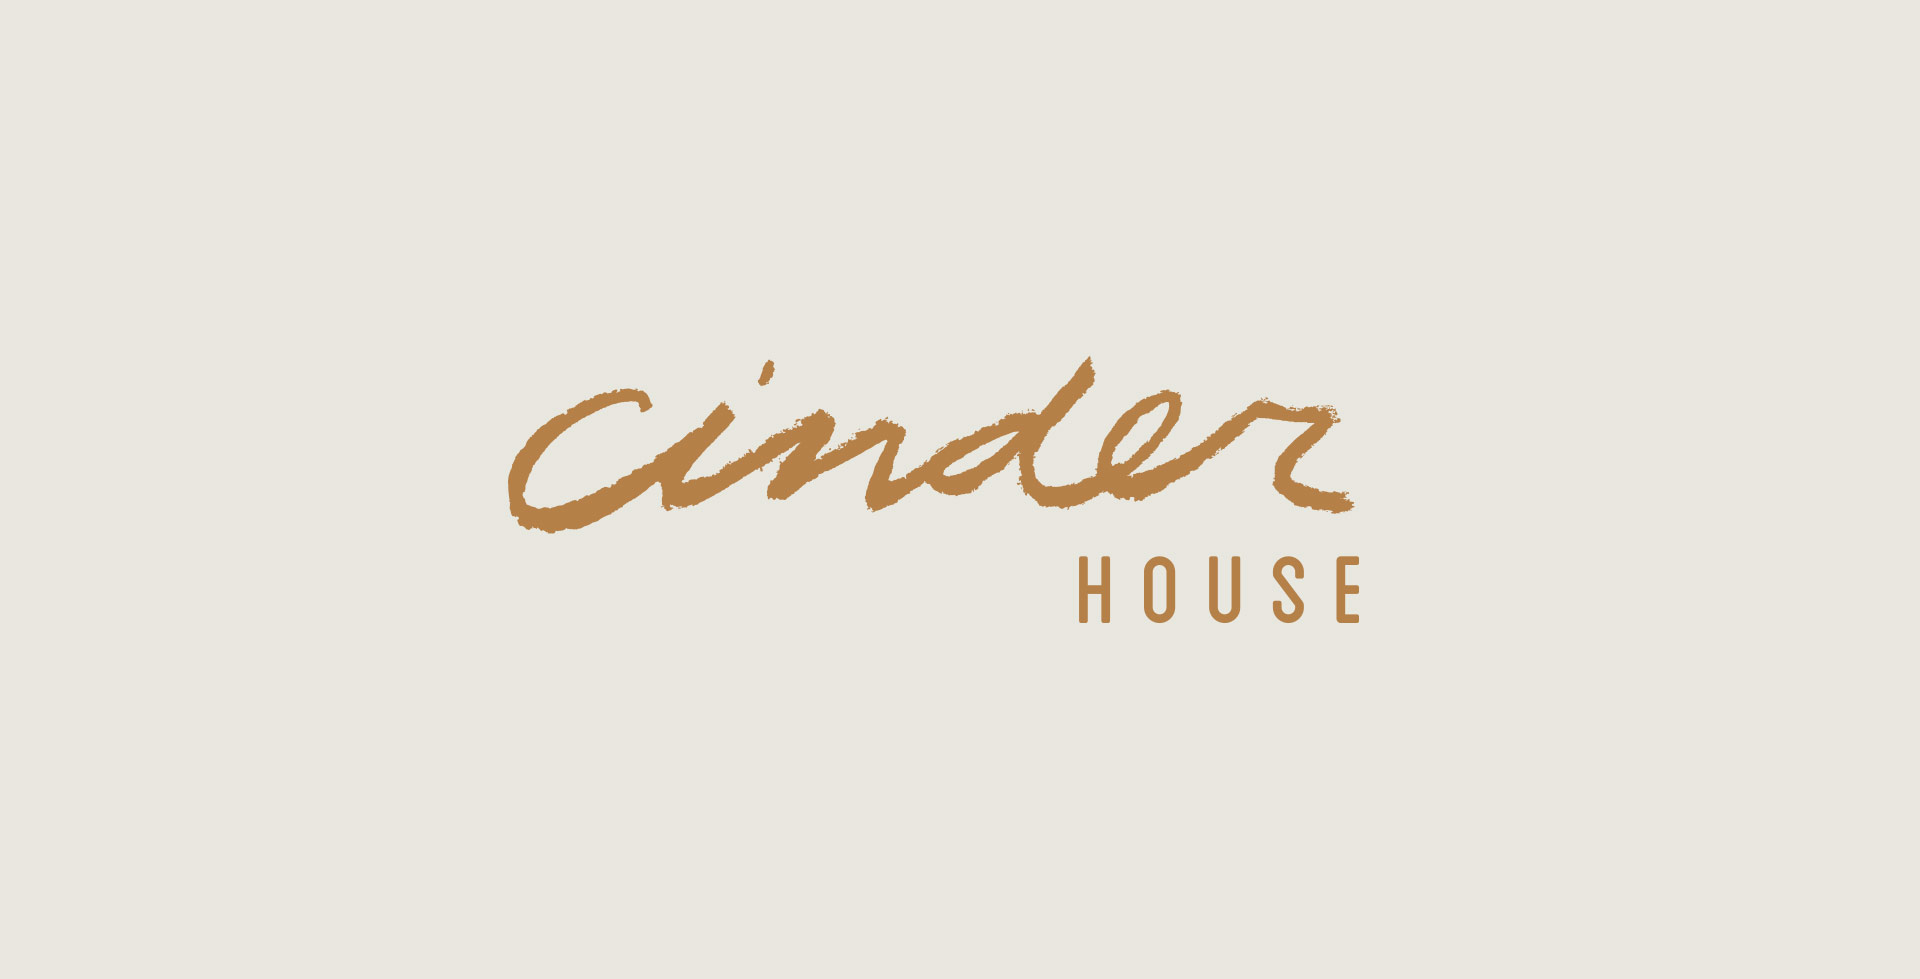 Cinder House logo design drawn in charcoal